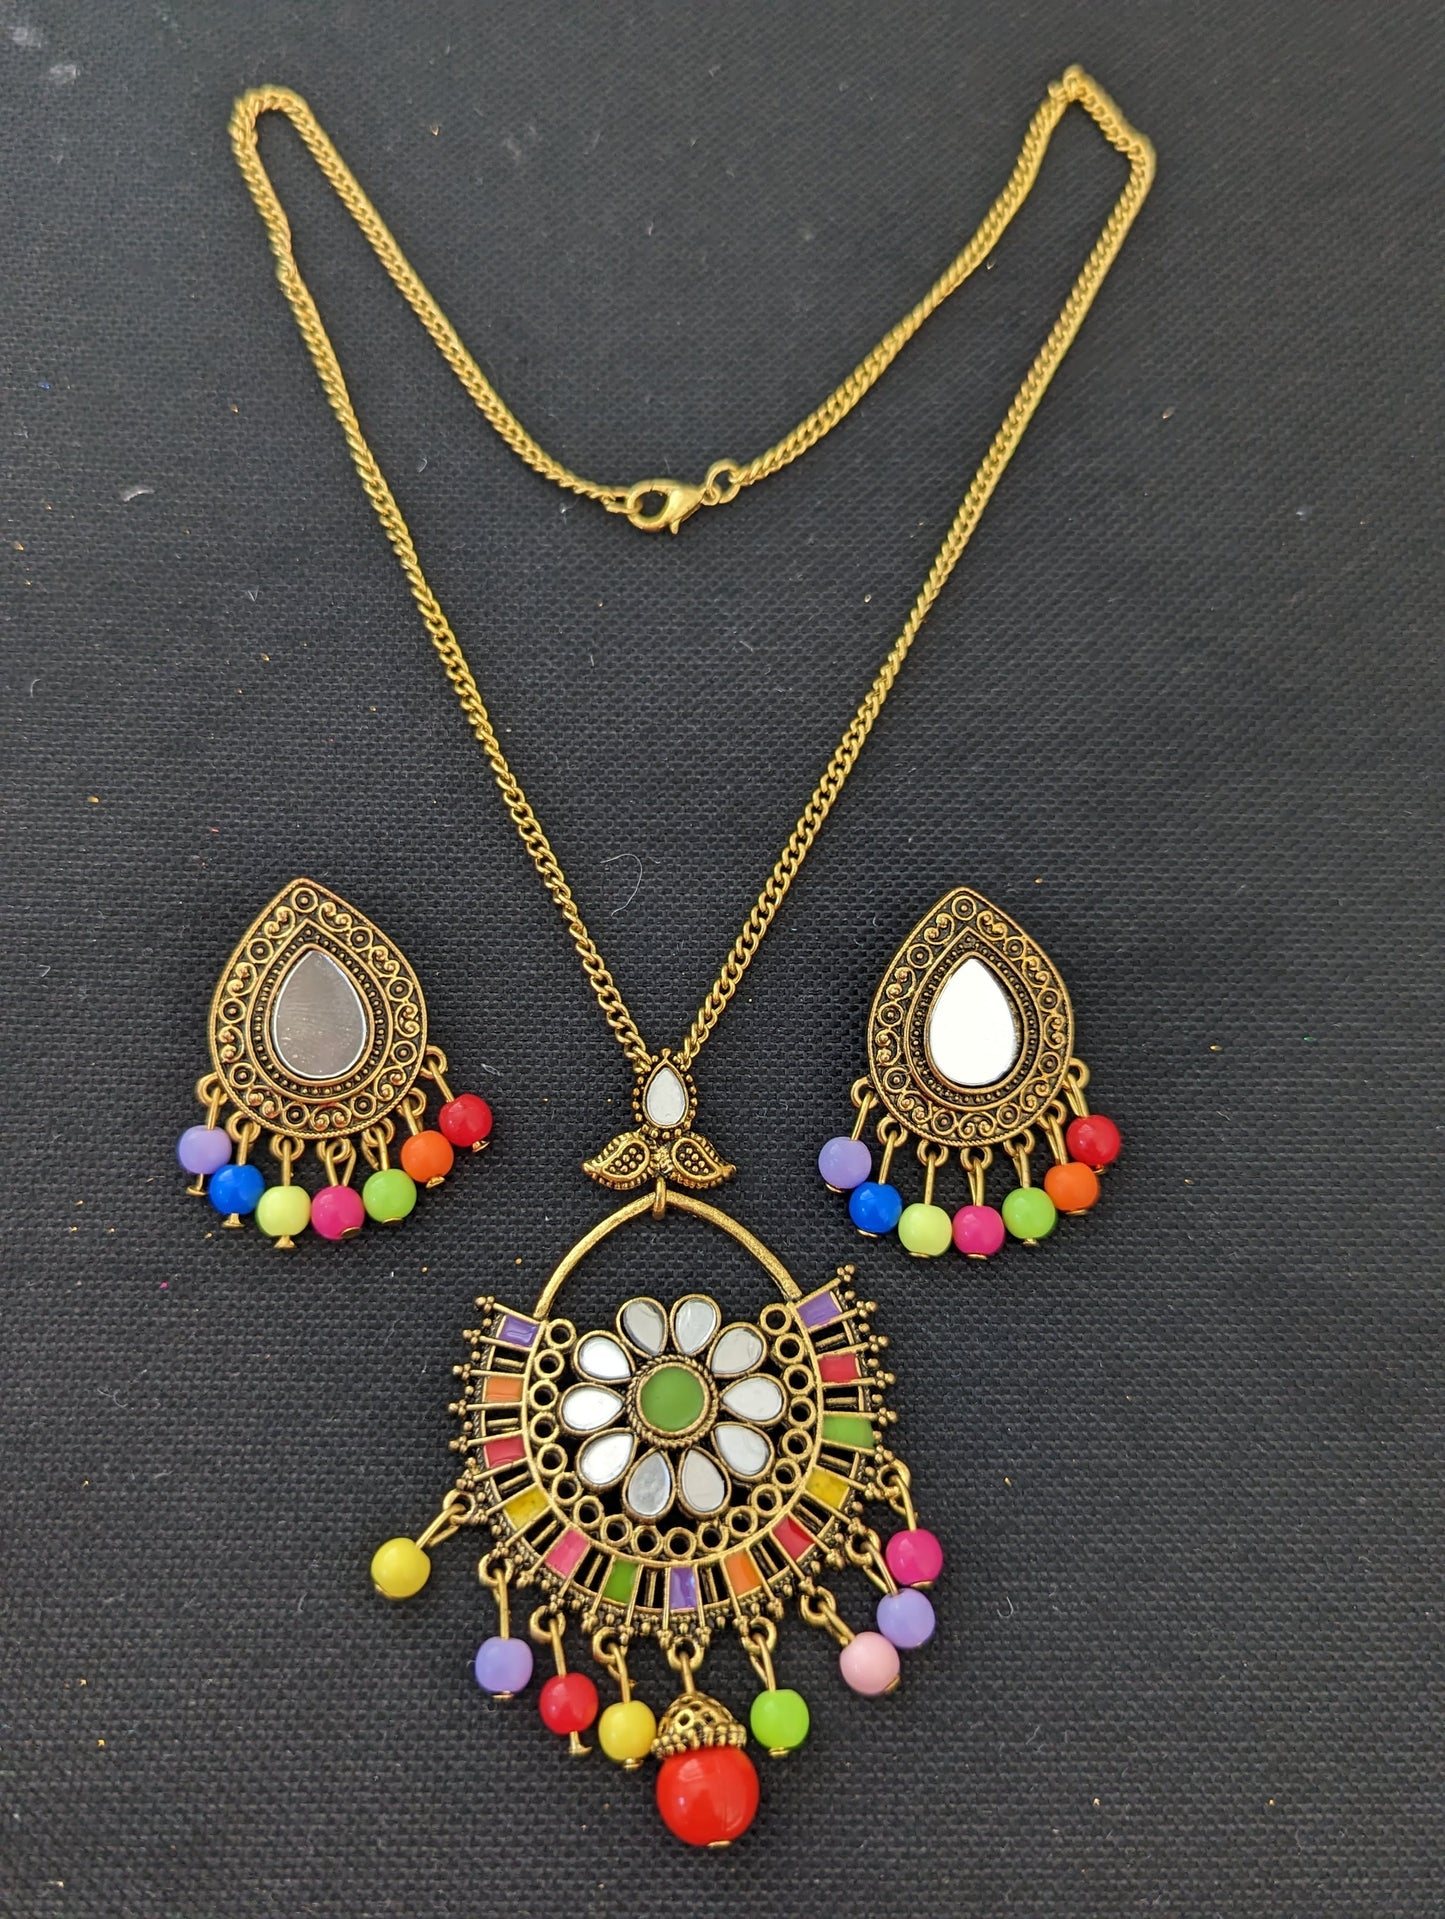 Antique gold mirror pendant chain necklace and earring set - Design 5